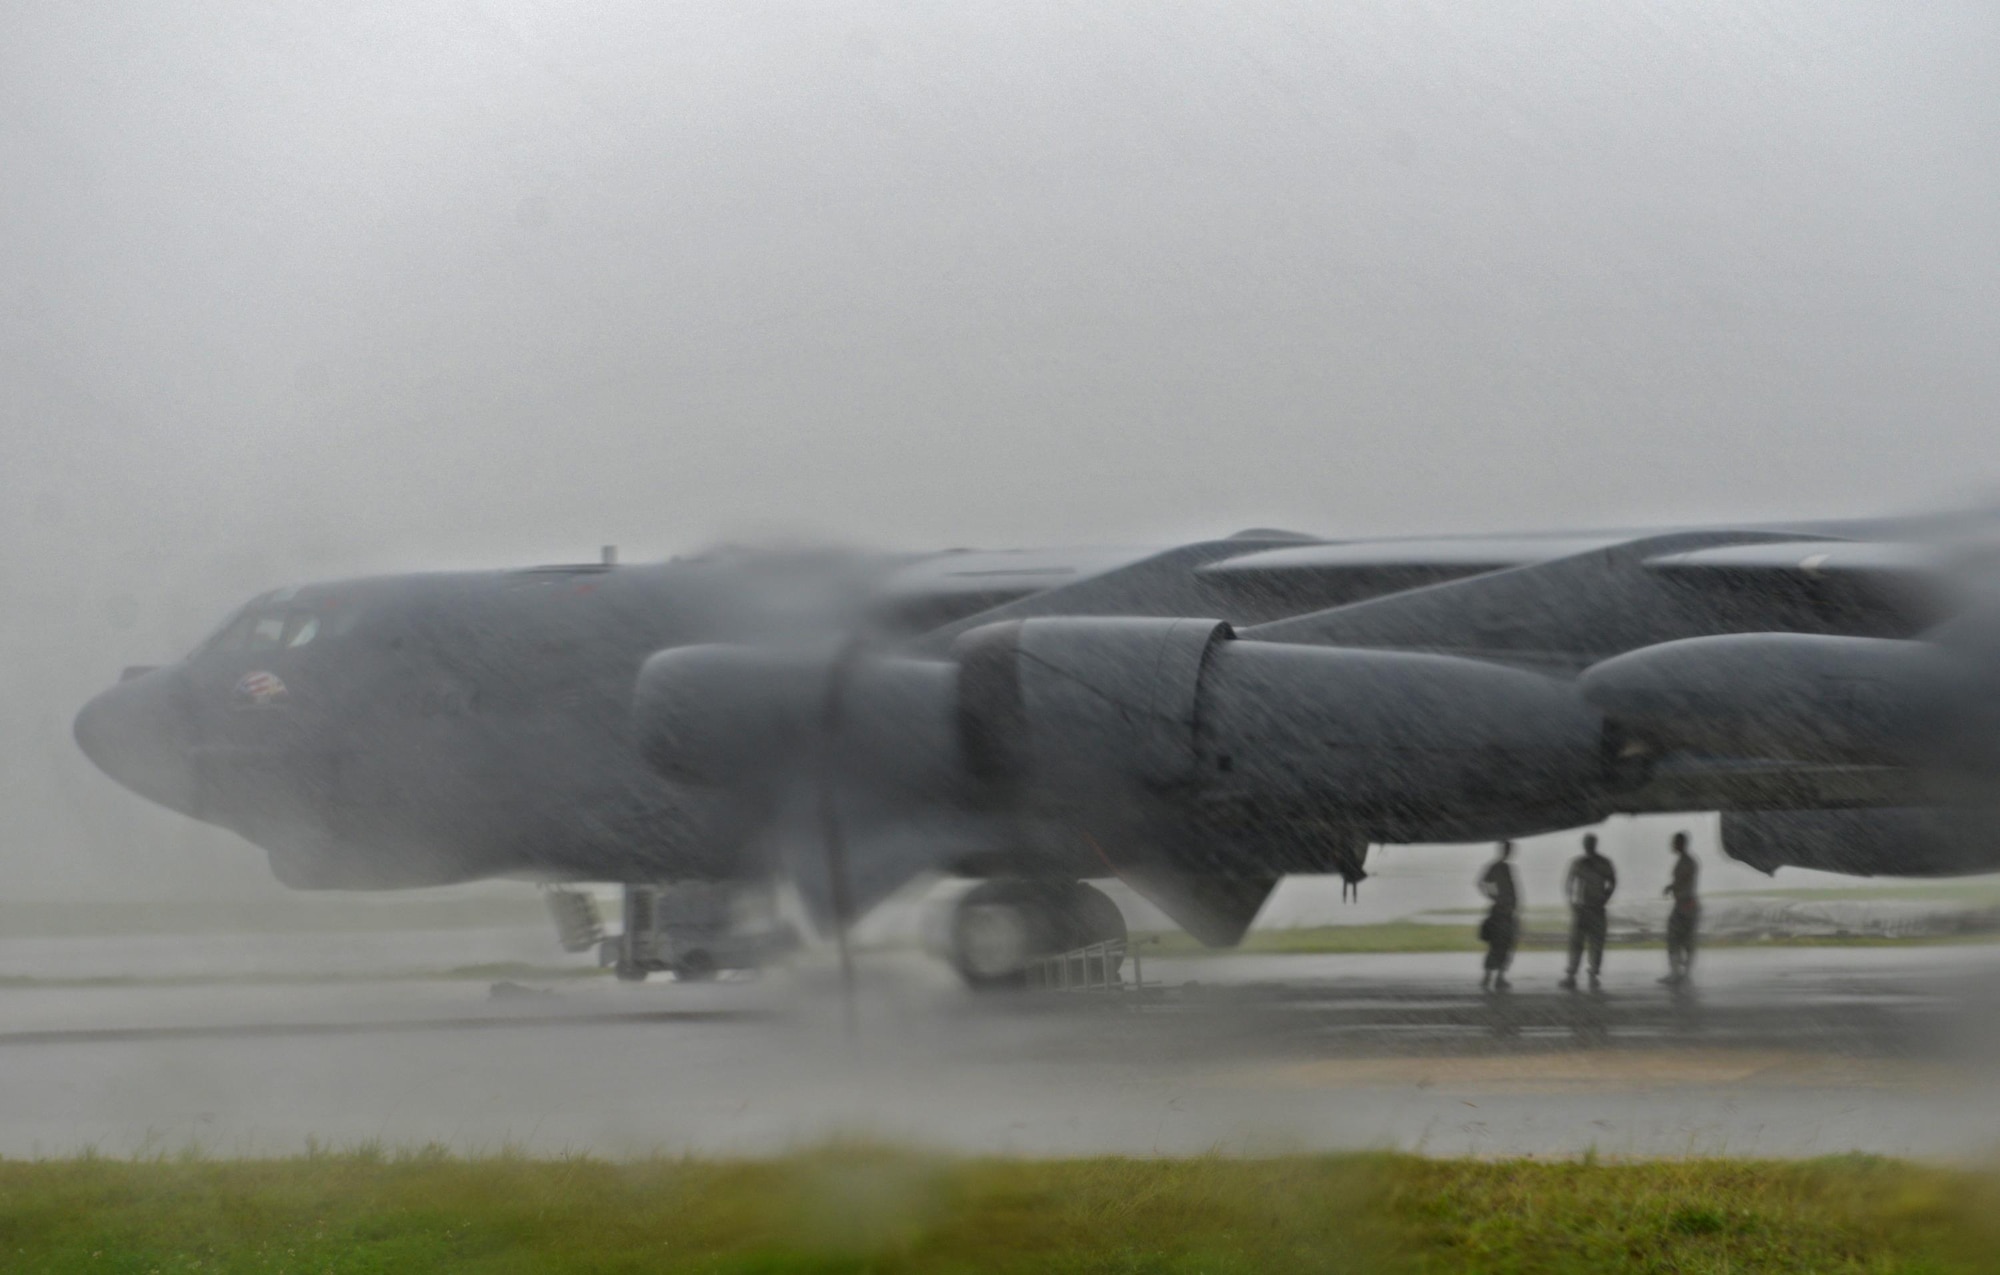 Airmen assigned to the 36th Expeditionary Aircraft Maintenance Squadron take shelter under a B-52H Stratofortress prior to the start of a munitions loading exercise July 13, 2016, at Andersen Air Force Base, Guam. During the exercise, Airmen practiced loading inert munitions including, AGM-86 Conventional Air-Launched Cruise Missiles and AGM-158 Joint Air-to-Surface Standoff Missiles. (U.S. Air Force photo by Airman 1st Class Alexa Ann Henderson/Released)